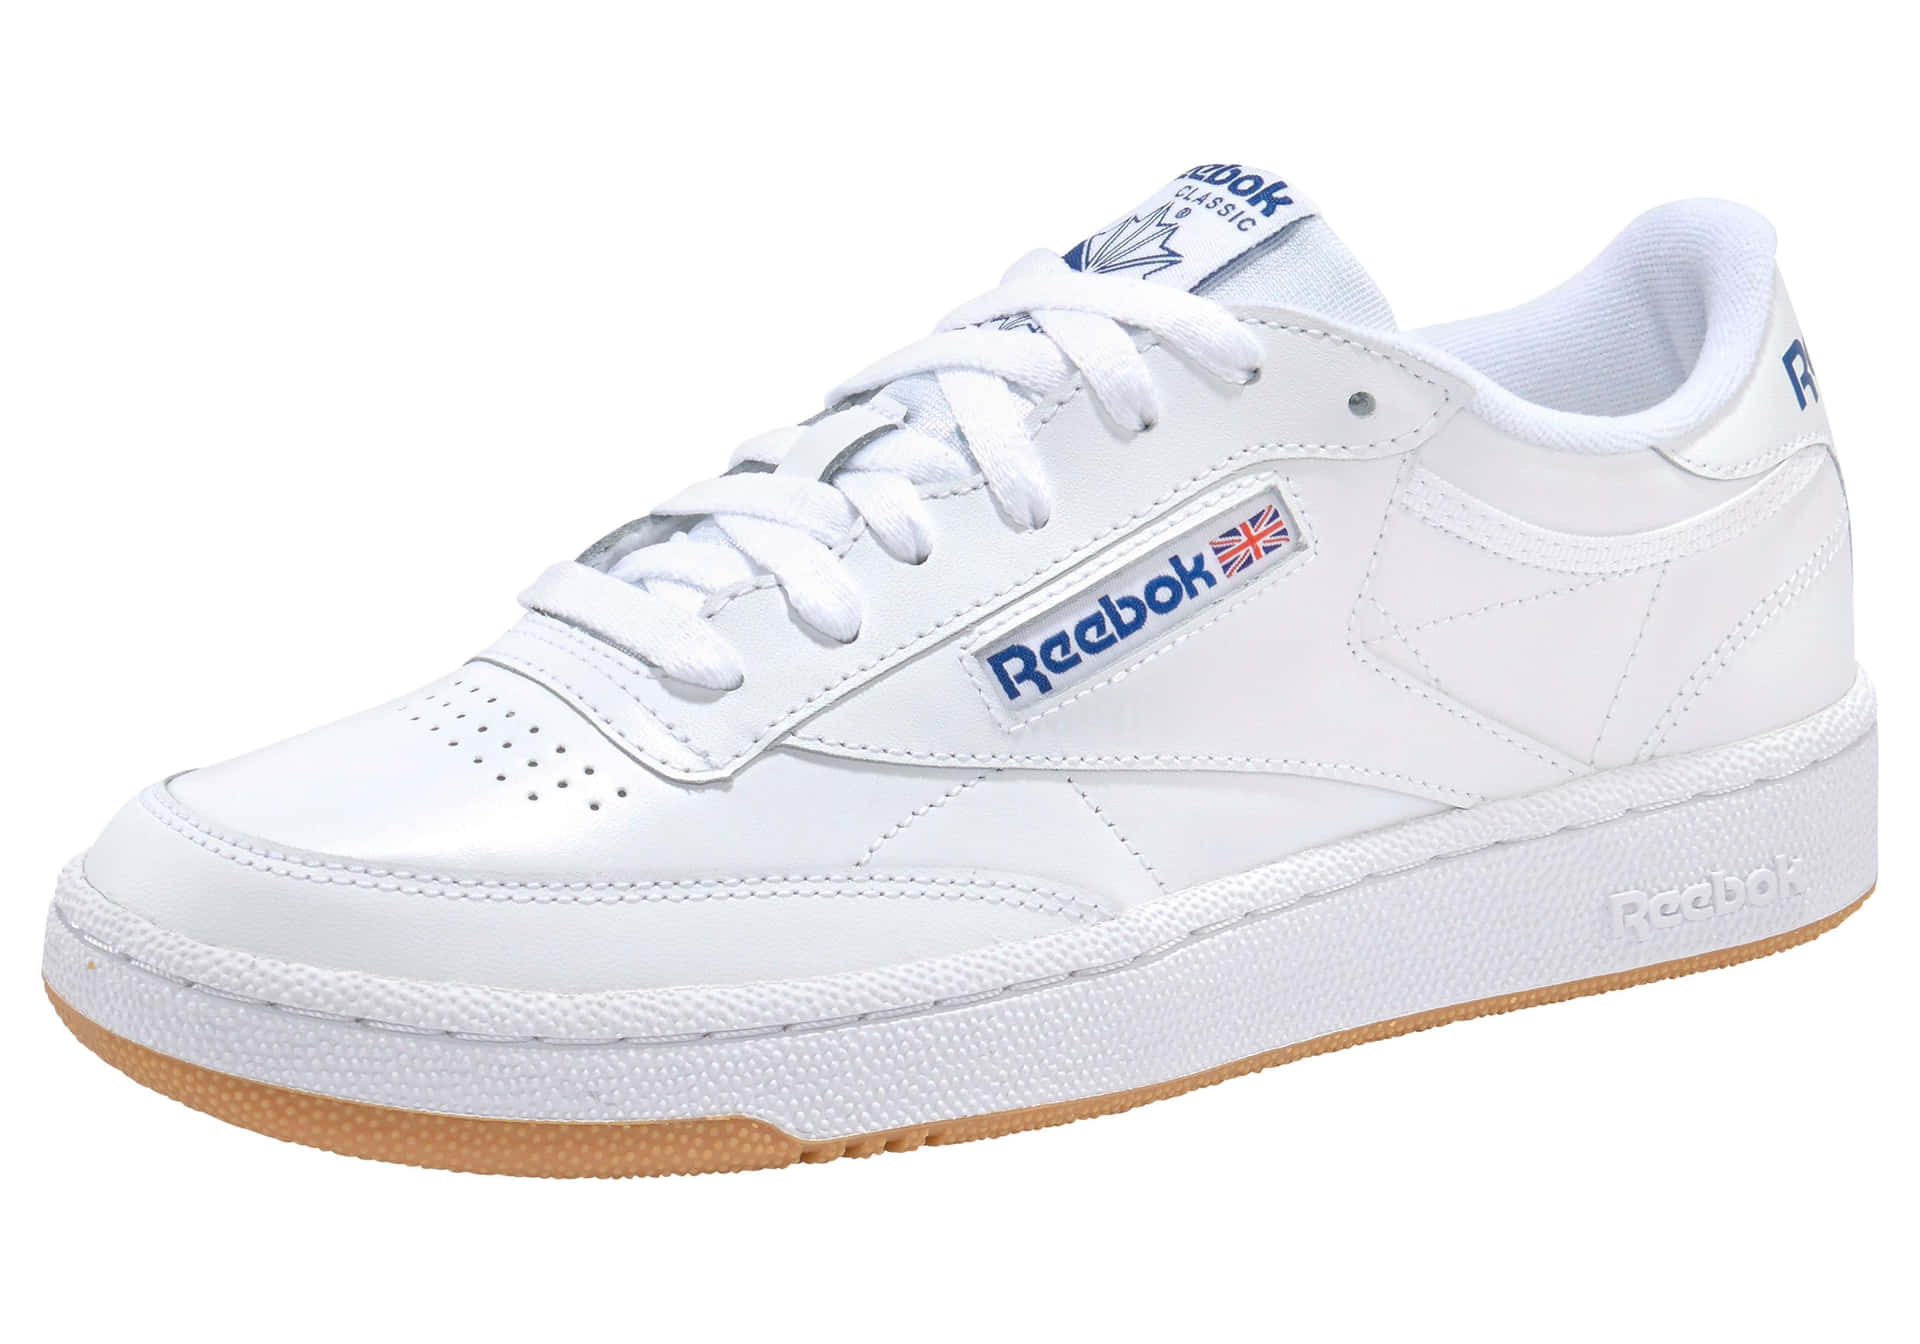 Get ready to hit the gym with Reebok